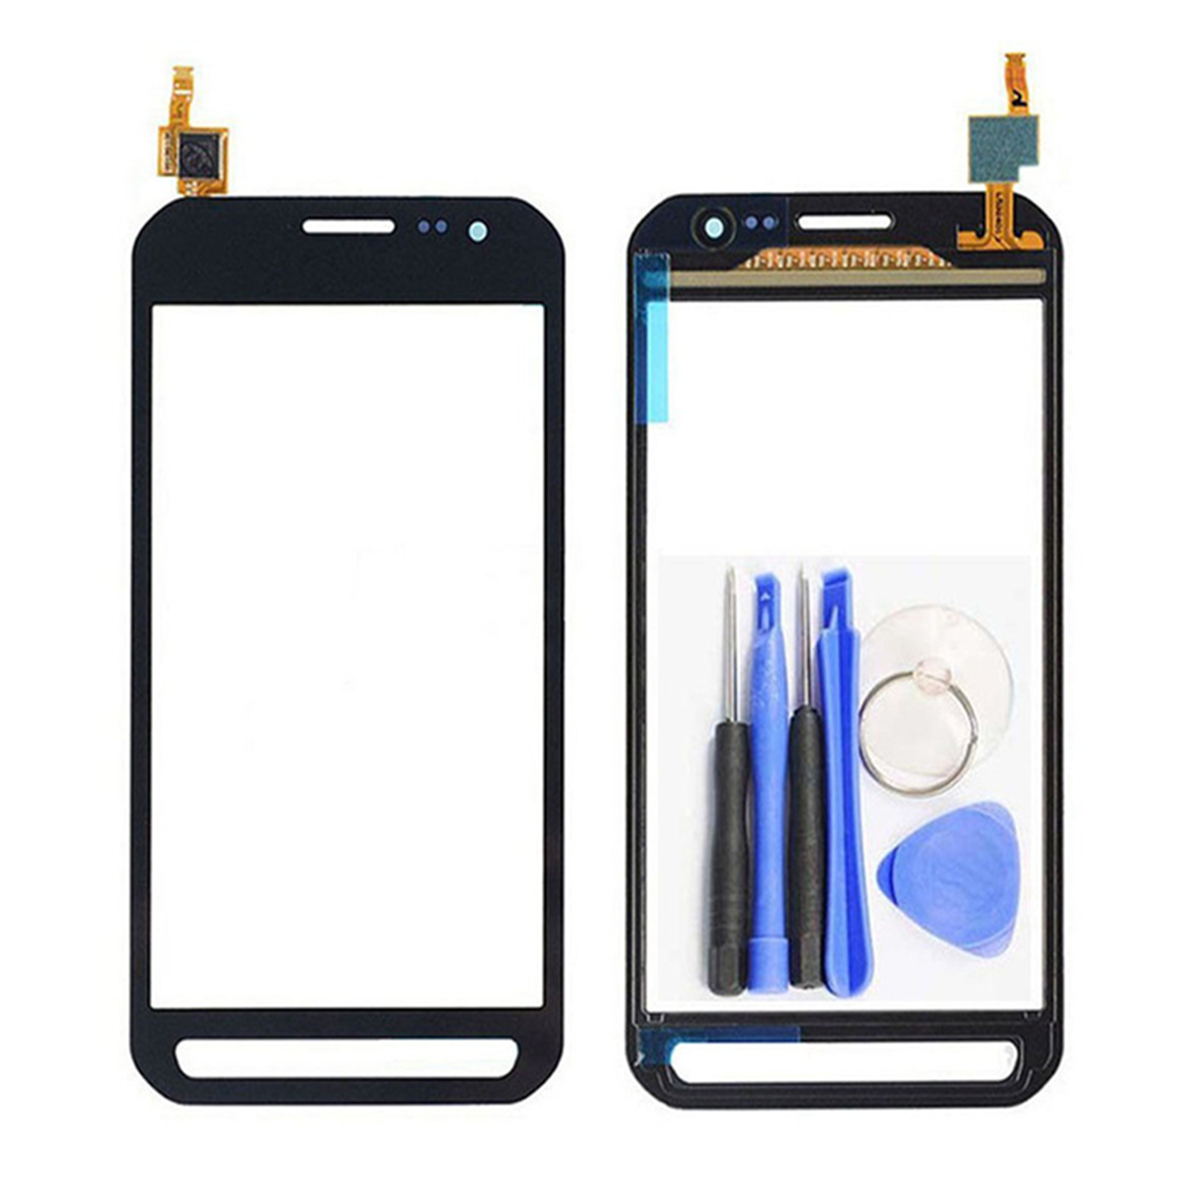 

Touch Screen Glass Digitizer Panel Assembly & Tools for Samsung Galaxy Xcover 3 G388